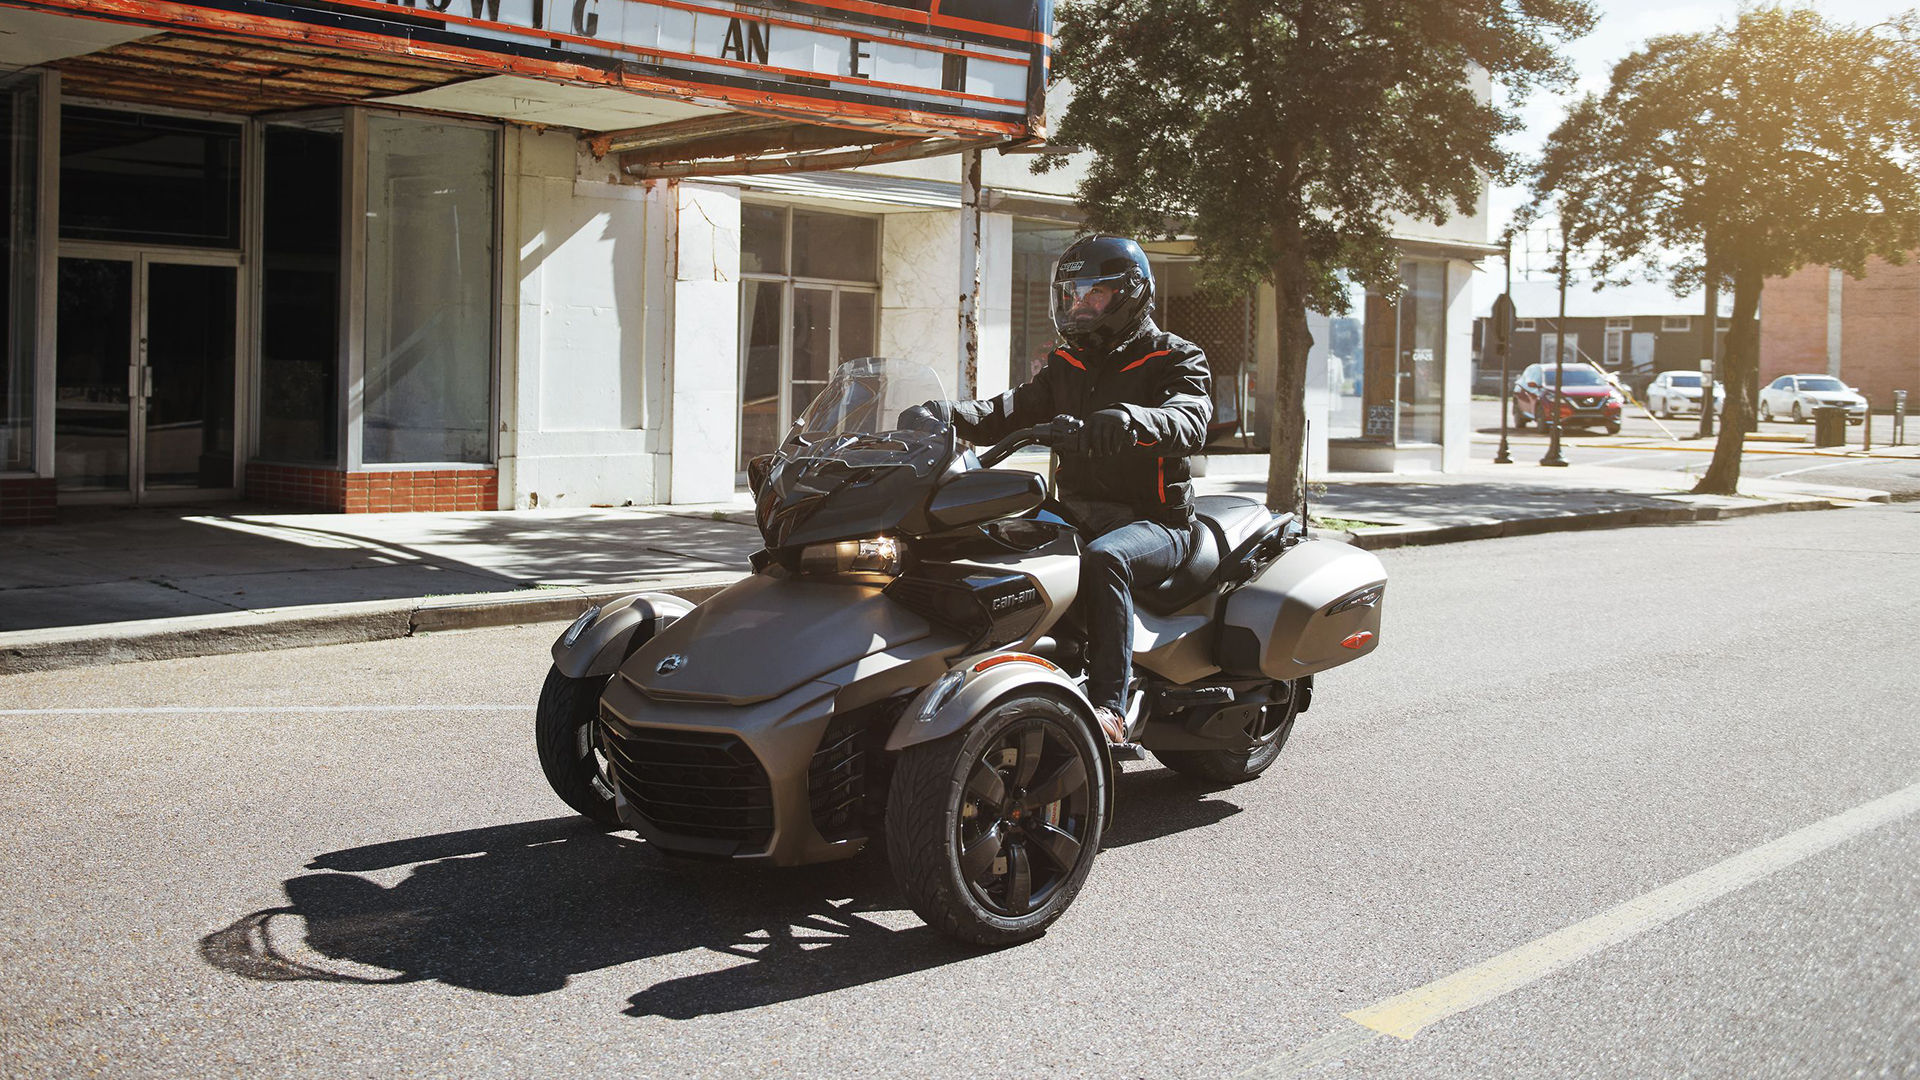 2023 Can-Am Spyder F3 3-wheel vehicle idle on a street